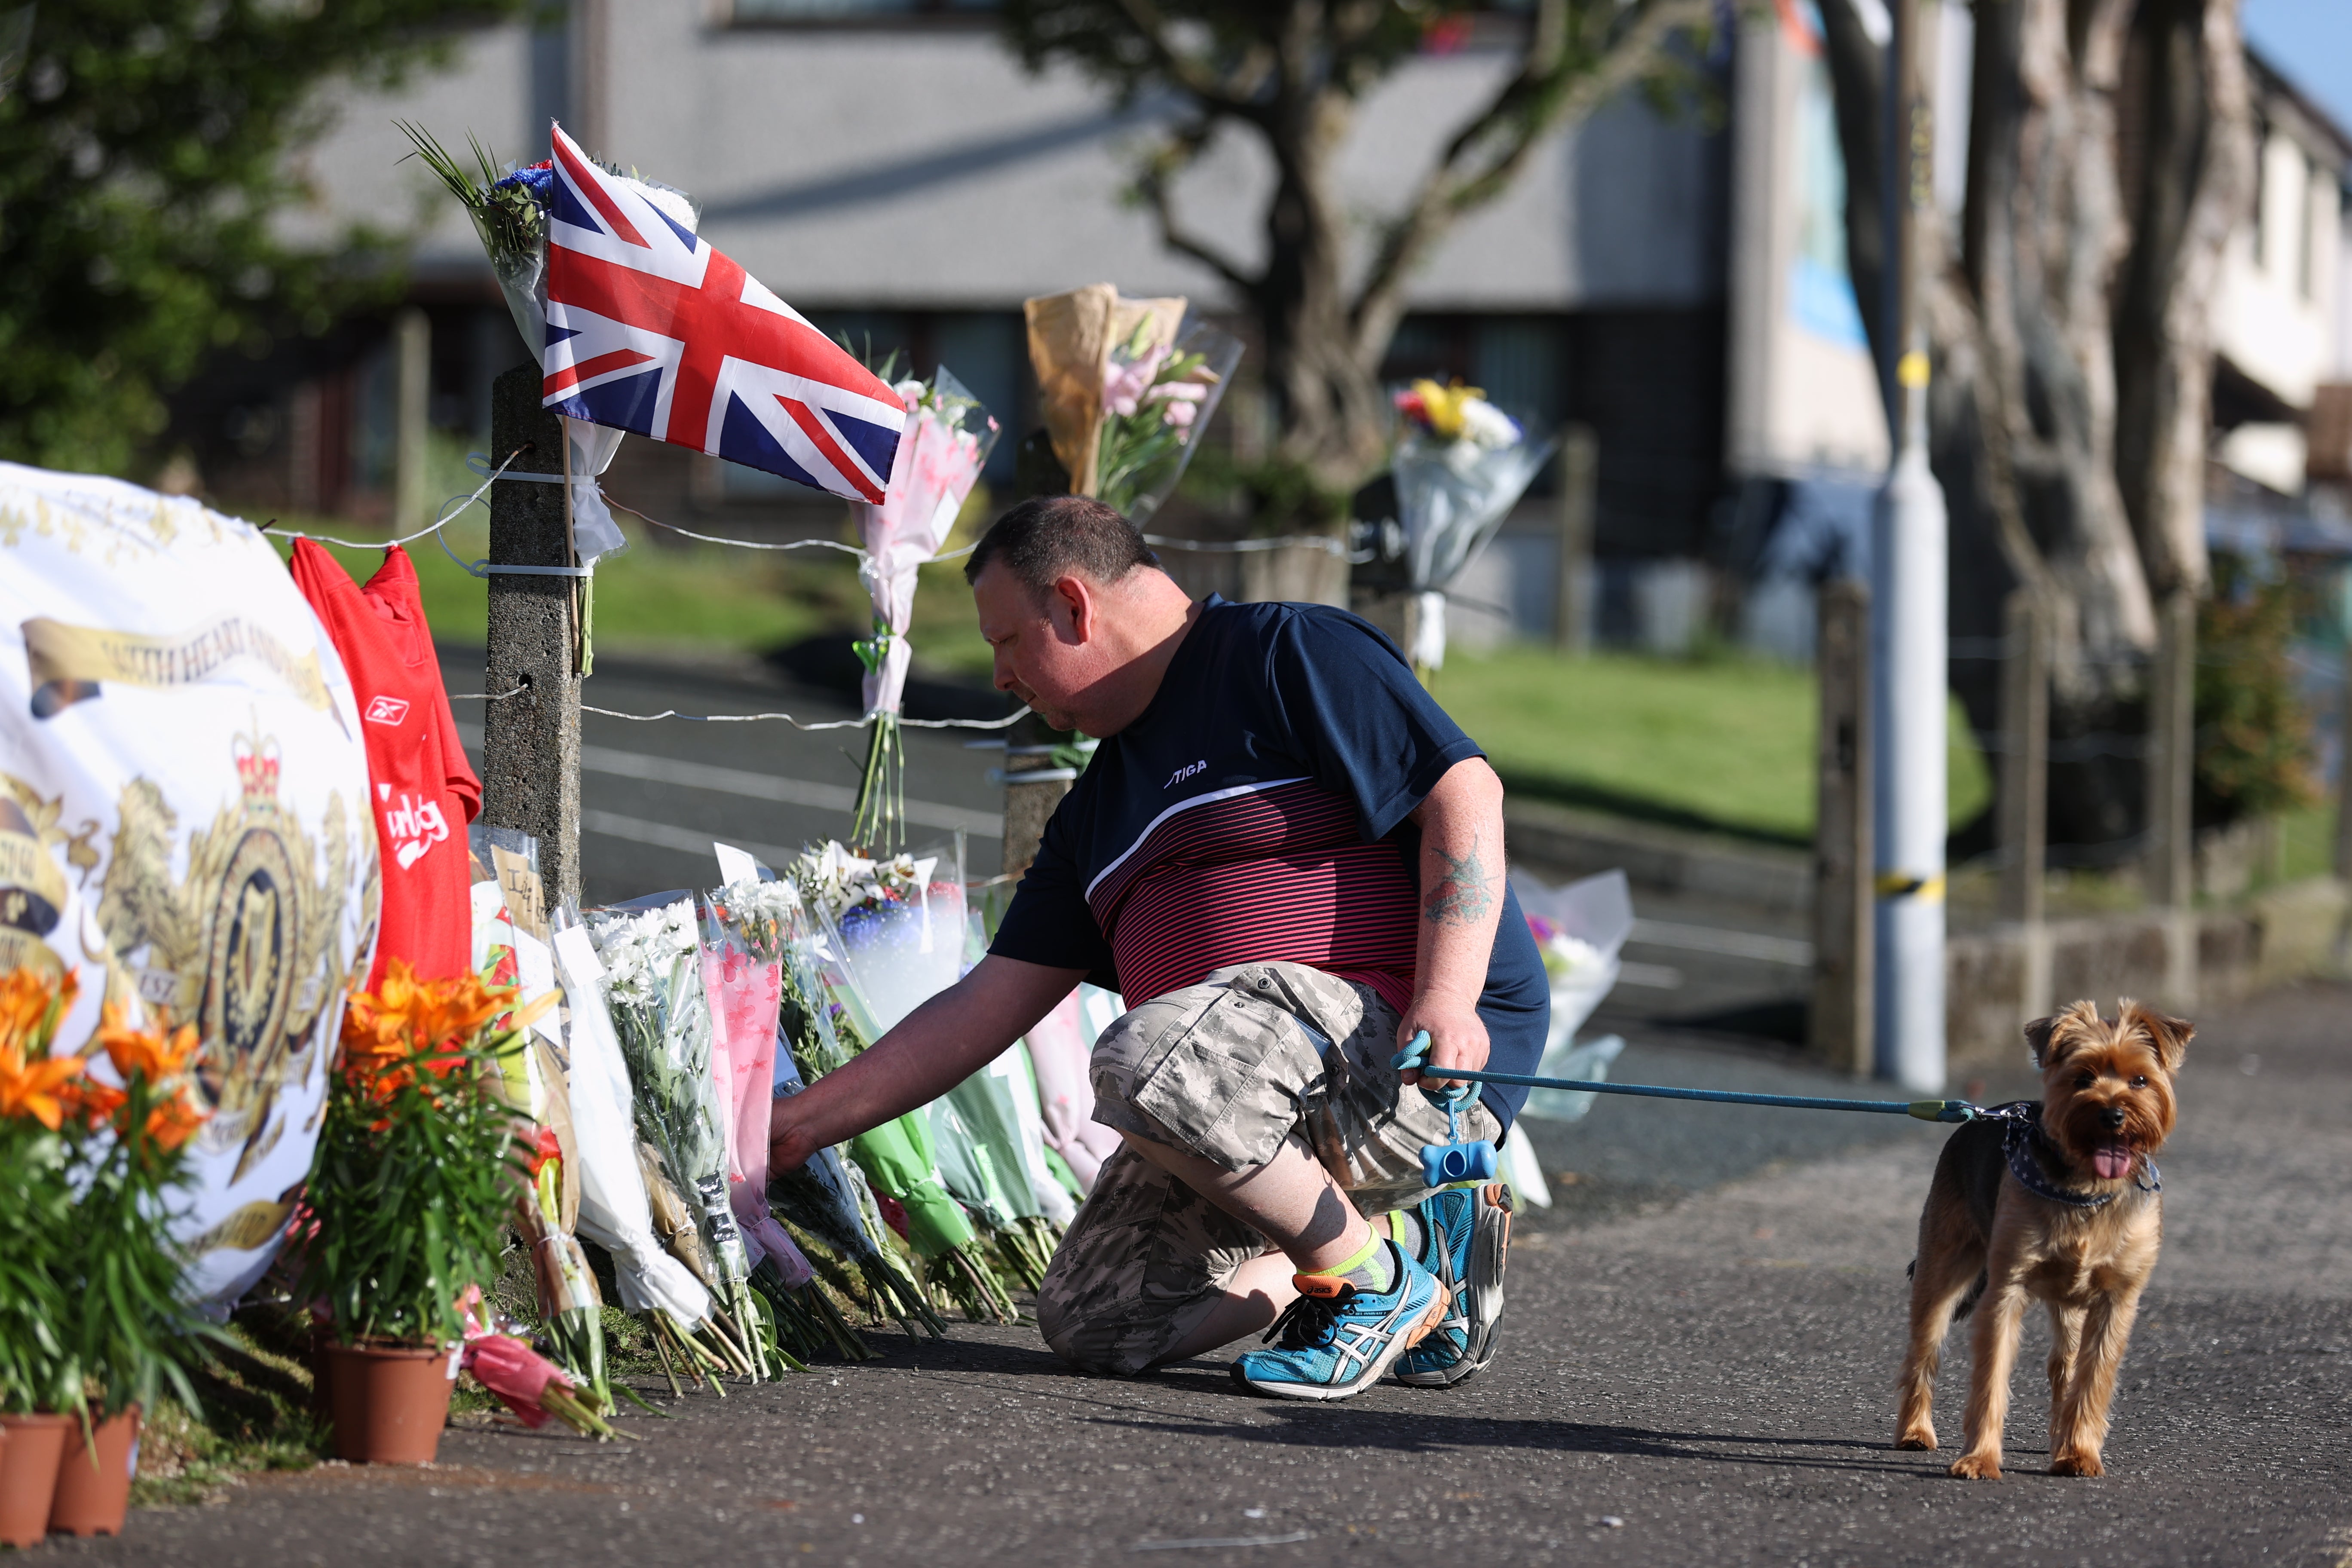 A man lays flowers near the scene after a man died after falling from a bonfire on the Antiville estate in Larne, Co Antrim on Saturday night. Police and ambulance personnel attended the scene after the fatal incident, which happened just after 9.30pm. Picture date: Sunday July 10, 2022 (Liam McBurney/PA)